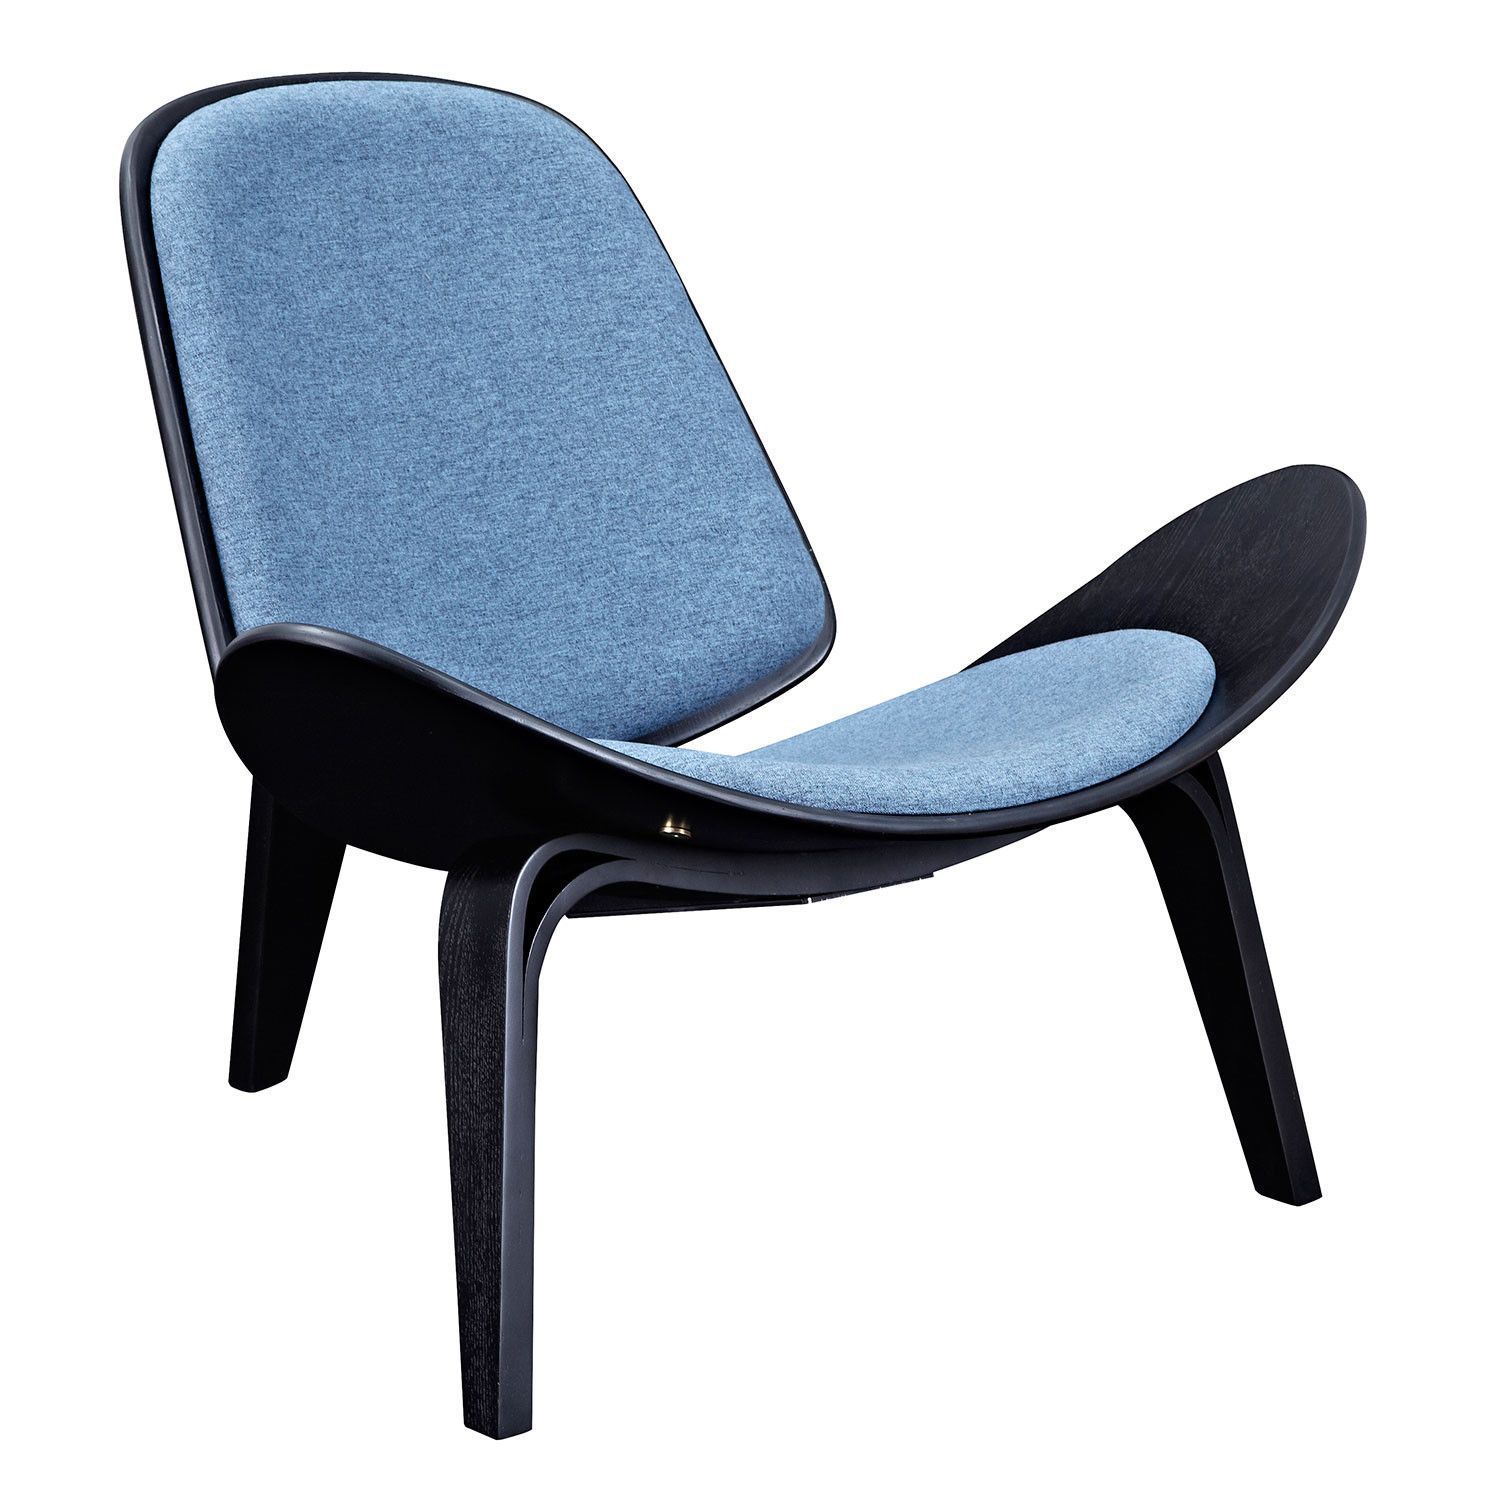 Hans Wegner Shell Style Chair In Black And Blue | Black Within Daleyza Slipper Chairs (View 7 of 15)